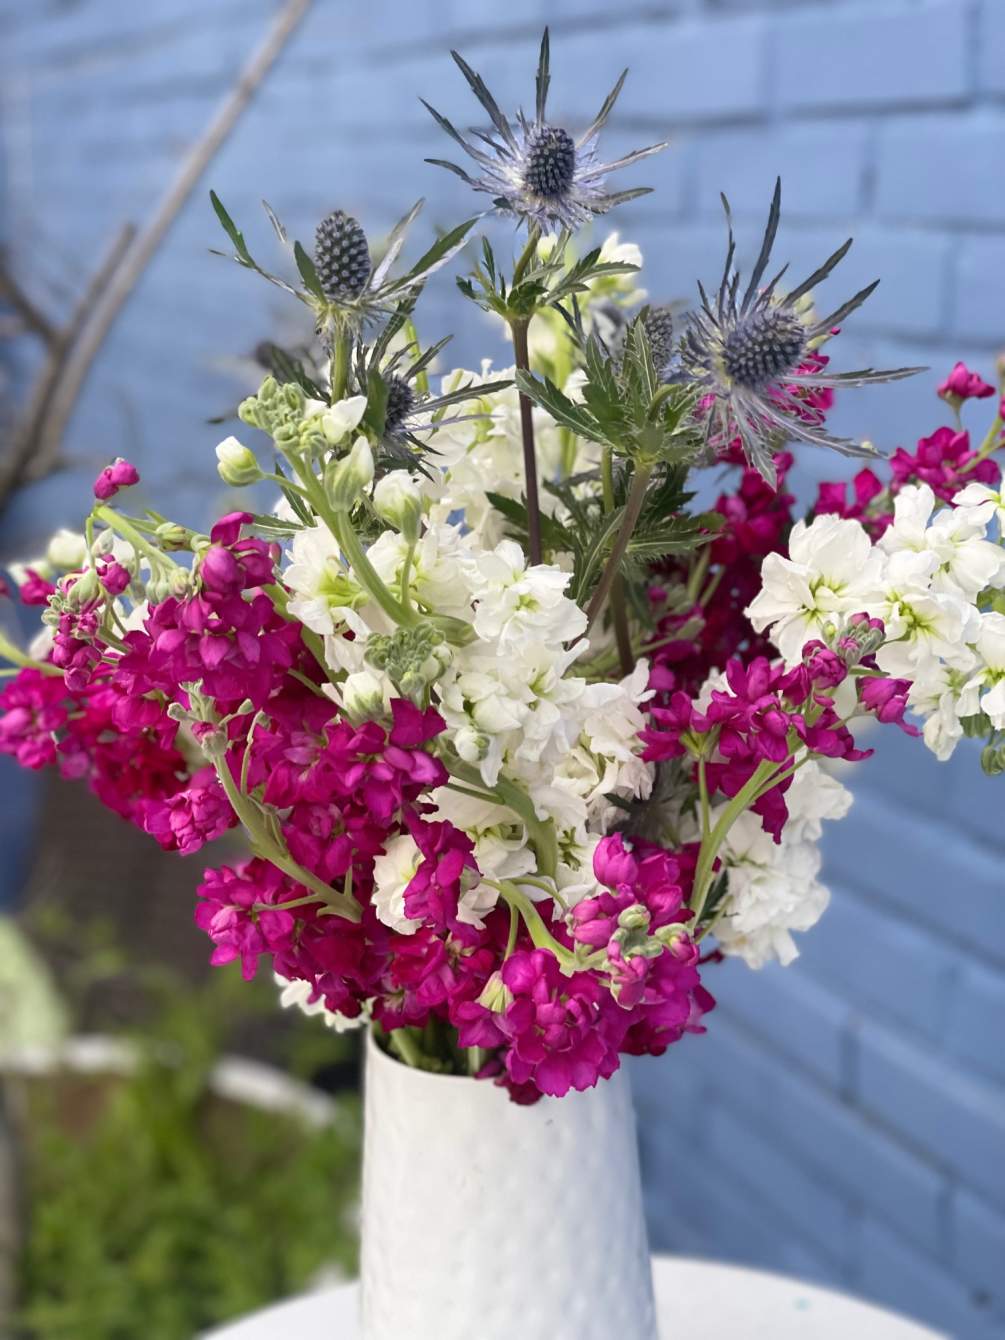 This simple arrangement is packed with blooms and filled with fragrance! The